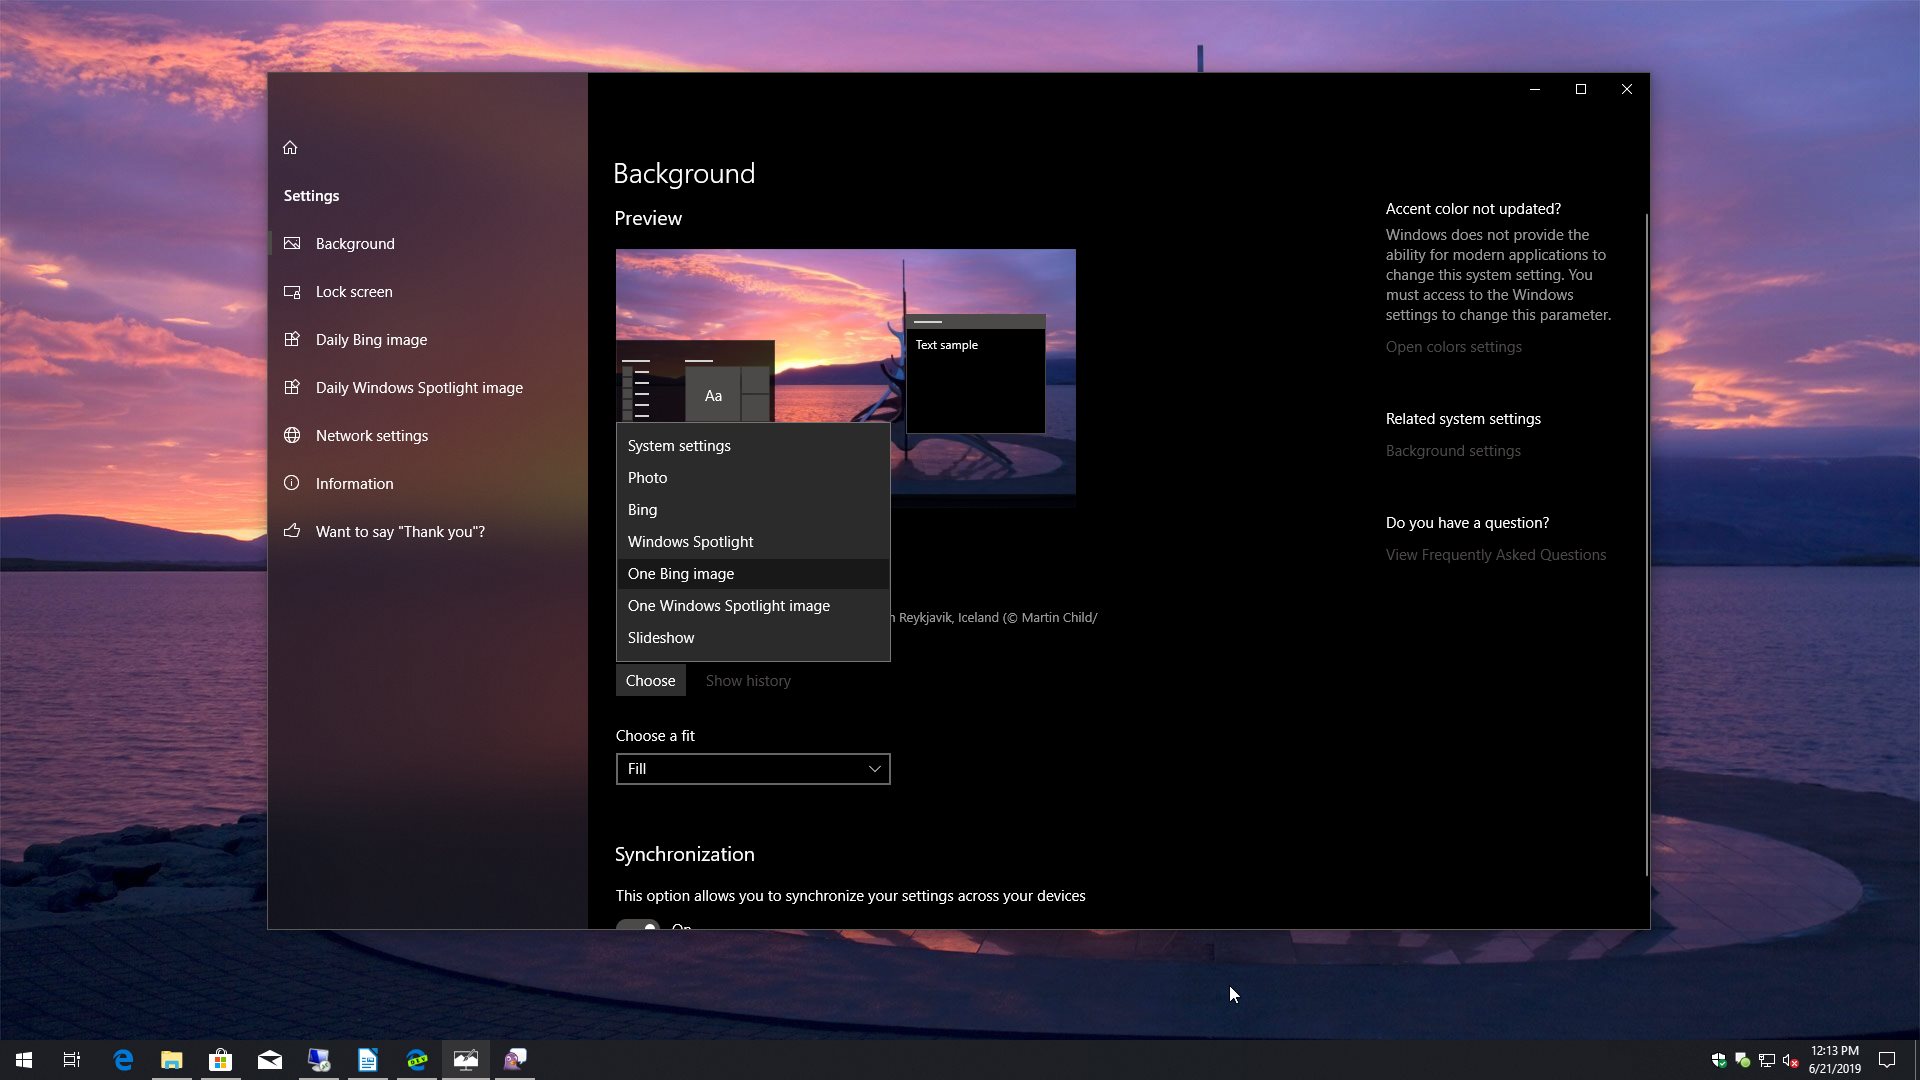 How to make themes for windows 10 - sgrouphon